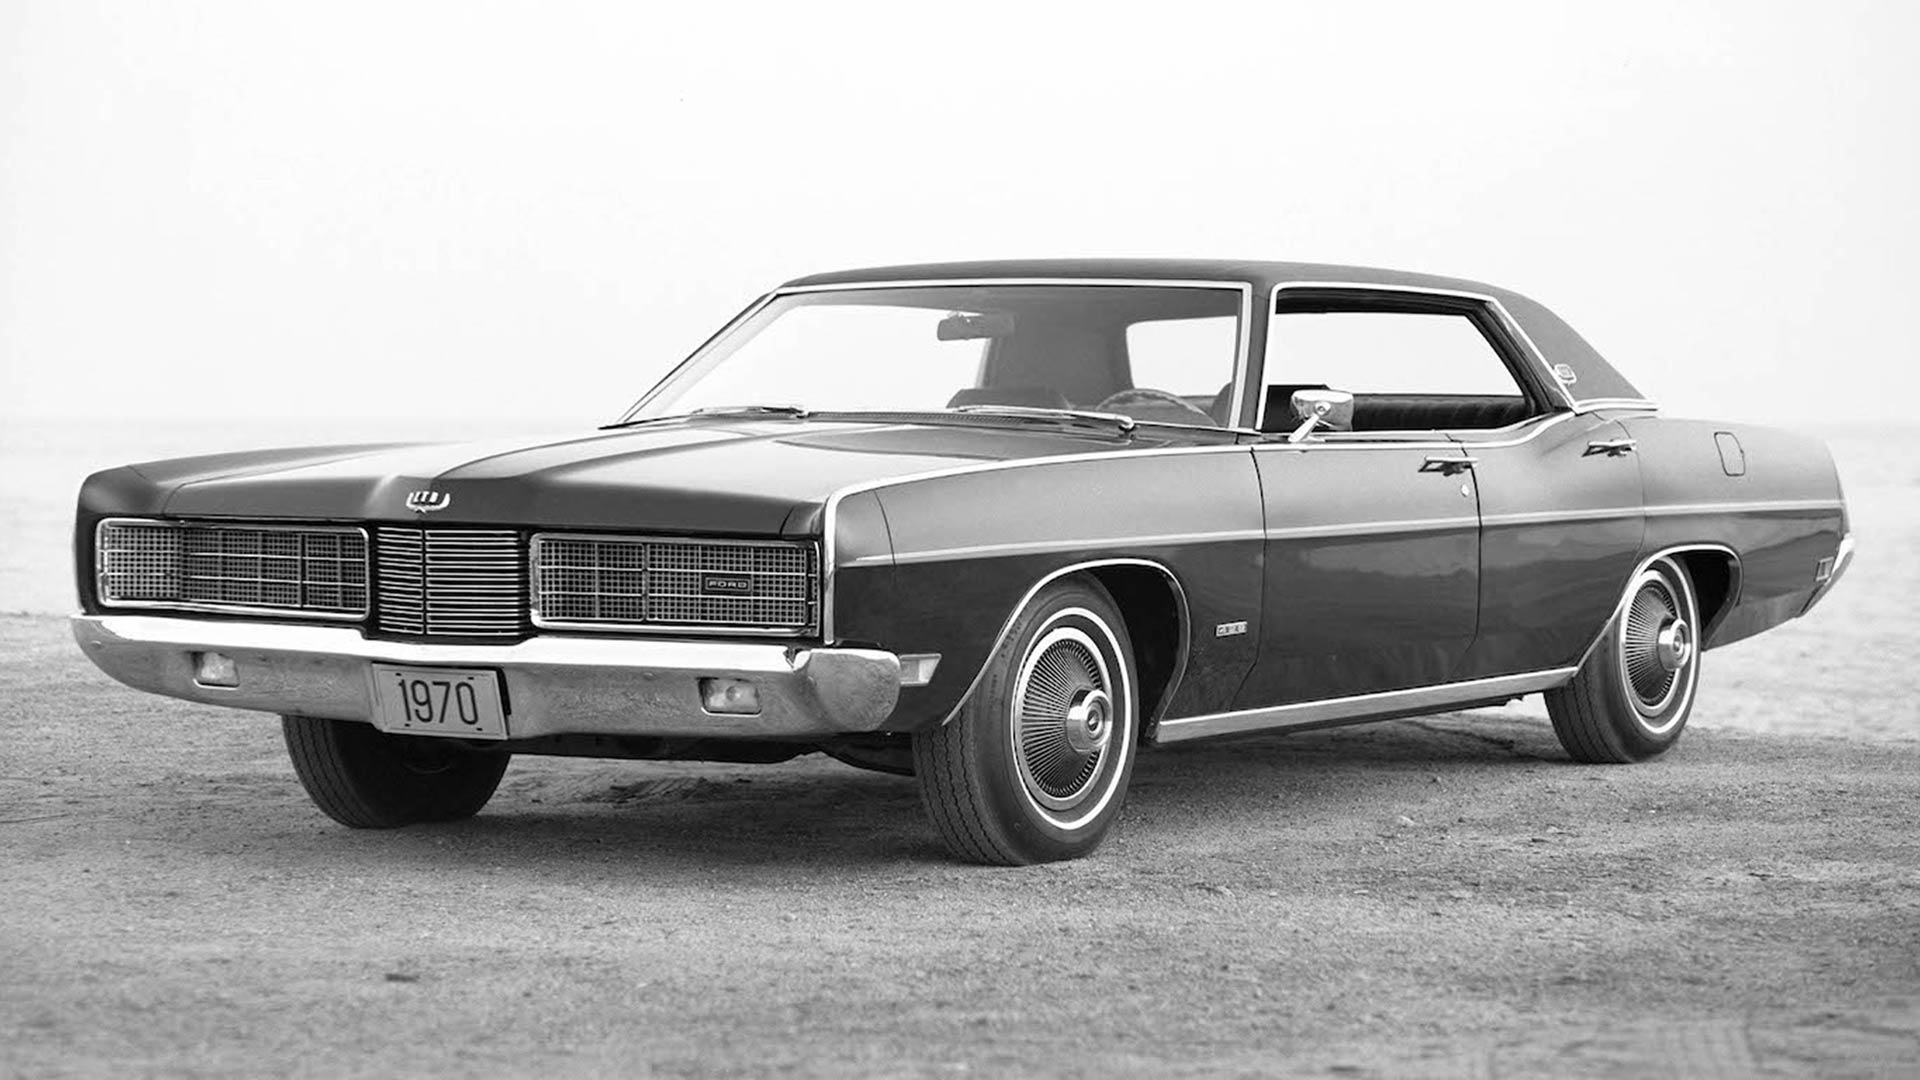 1970 Ford LTD – 216.1 inches